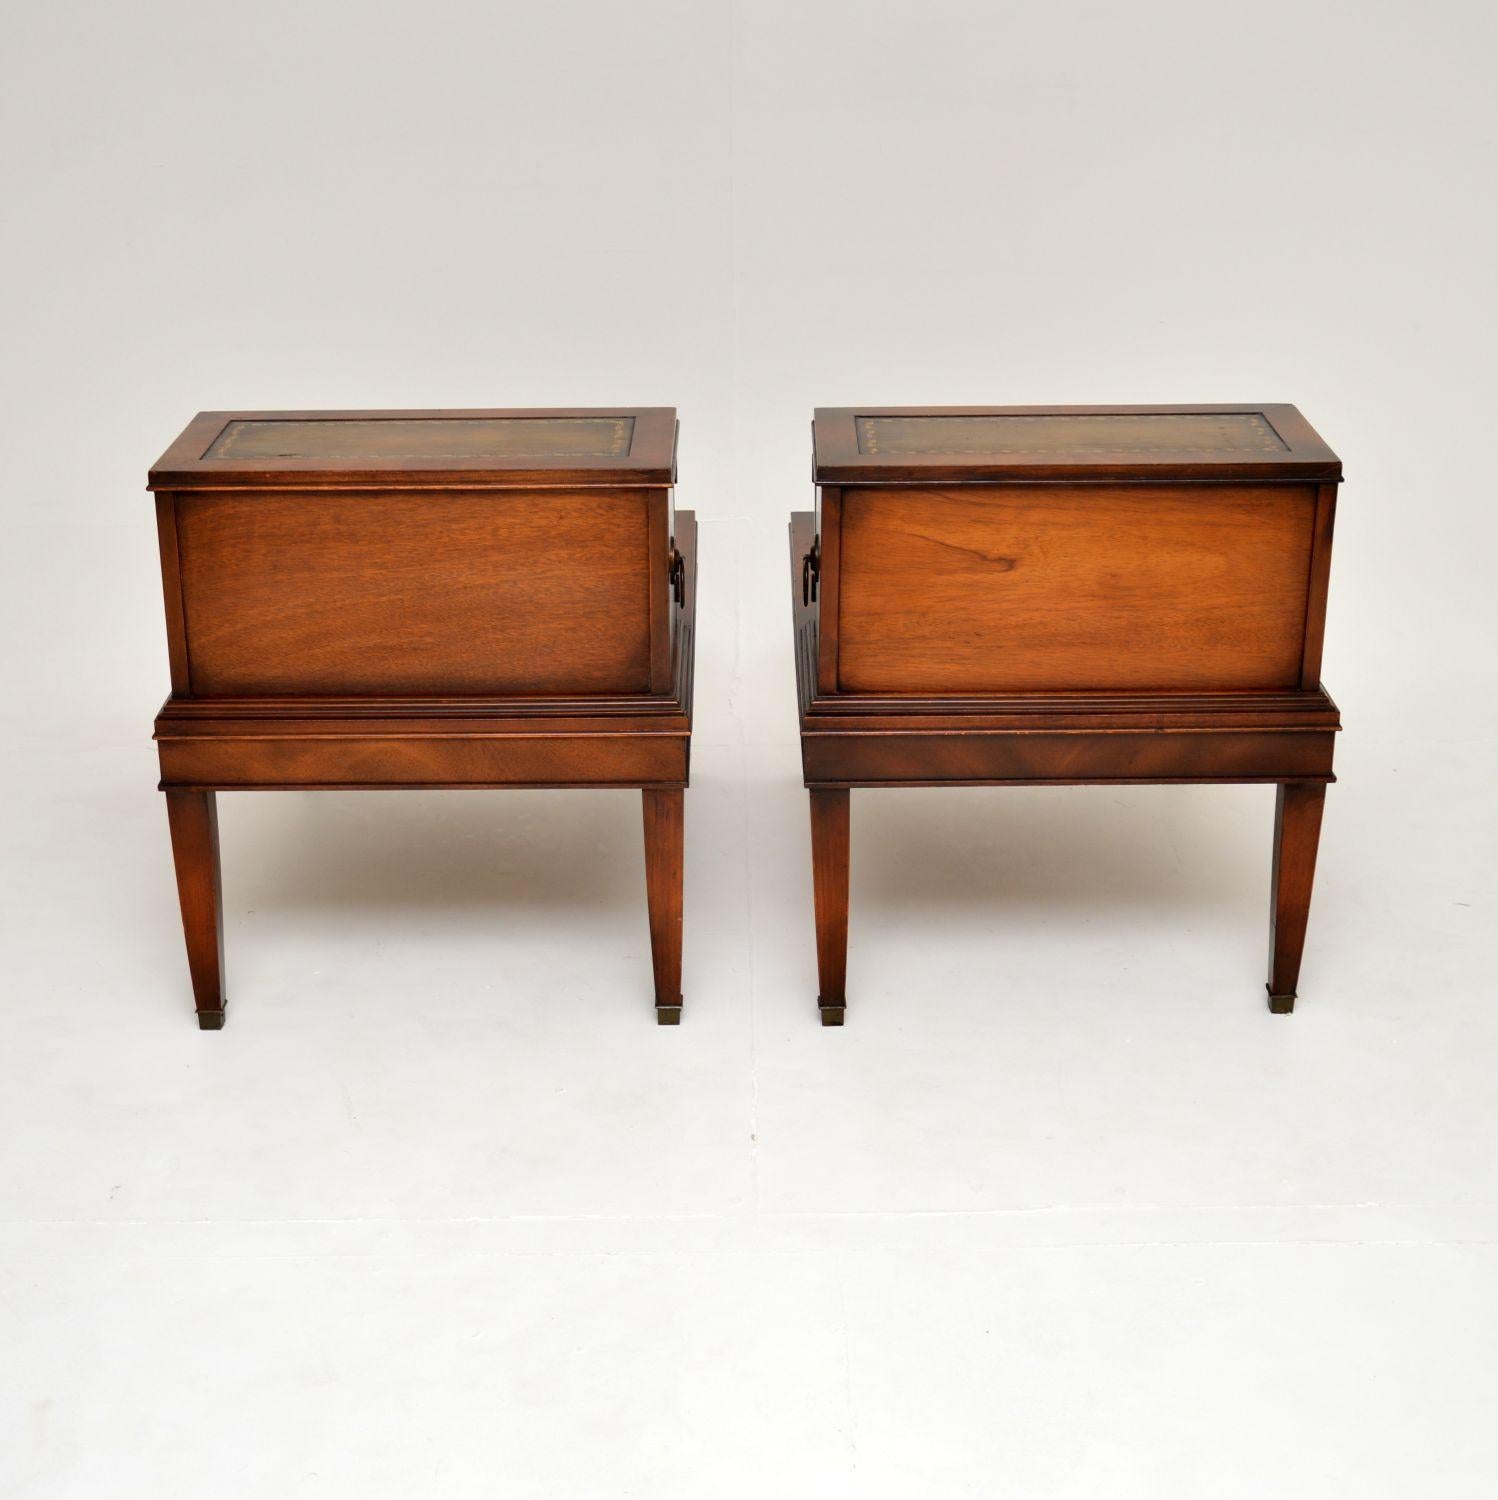 English Pair of Antique Leather Top Side Tables